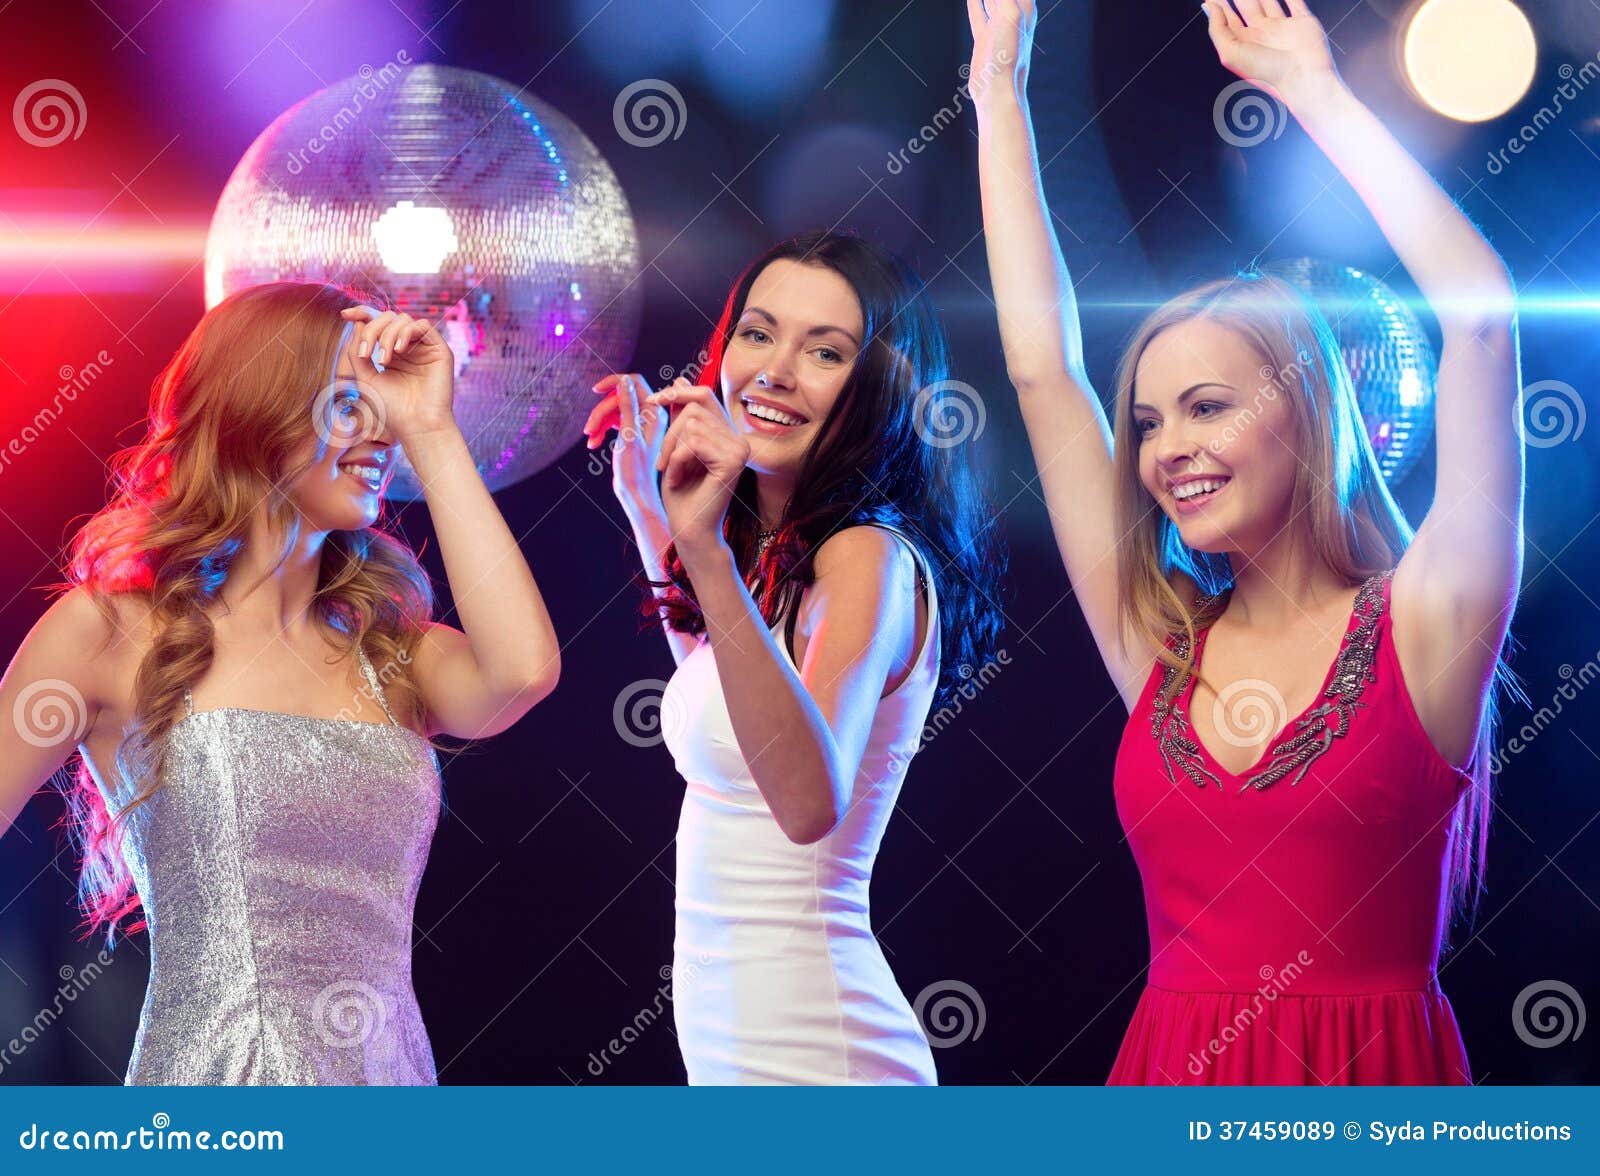 Three Smiling Women Dancing in the Club Stock Image - Image of clubbing ...